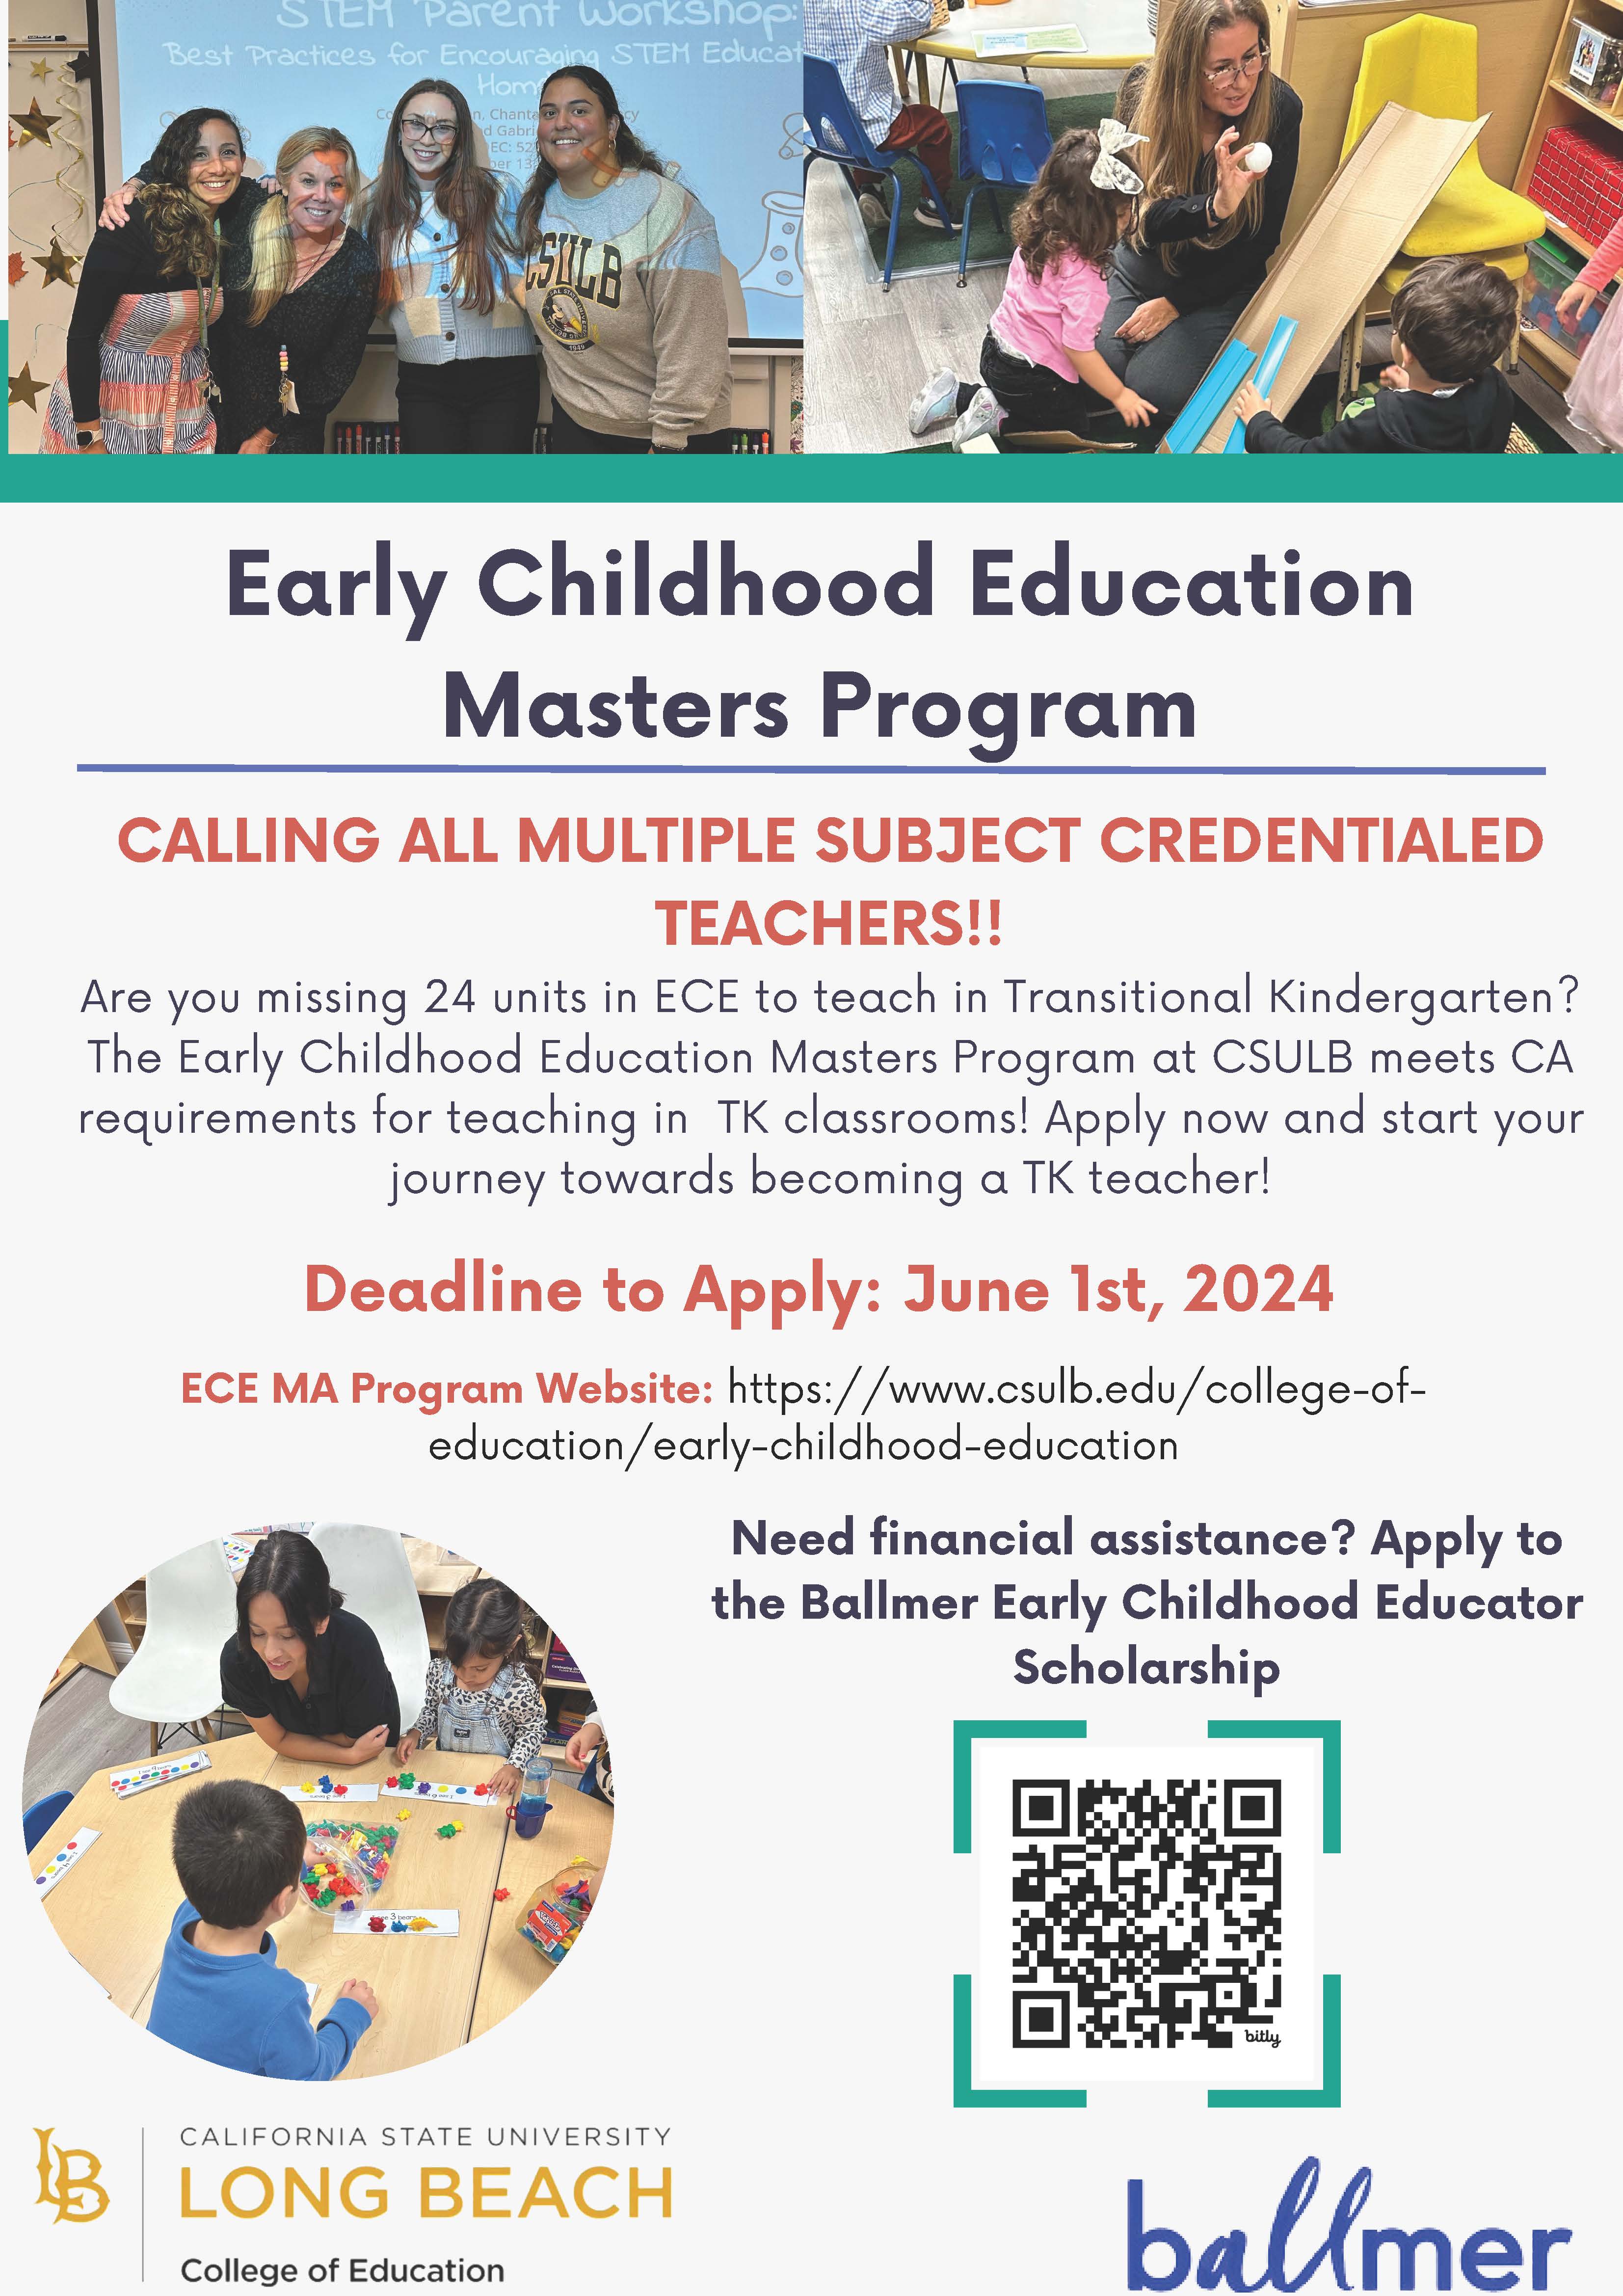 Calling All Multiple Subject Credentialed Teachers! Apply for a master's degree in Early Childhood Education